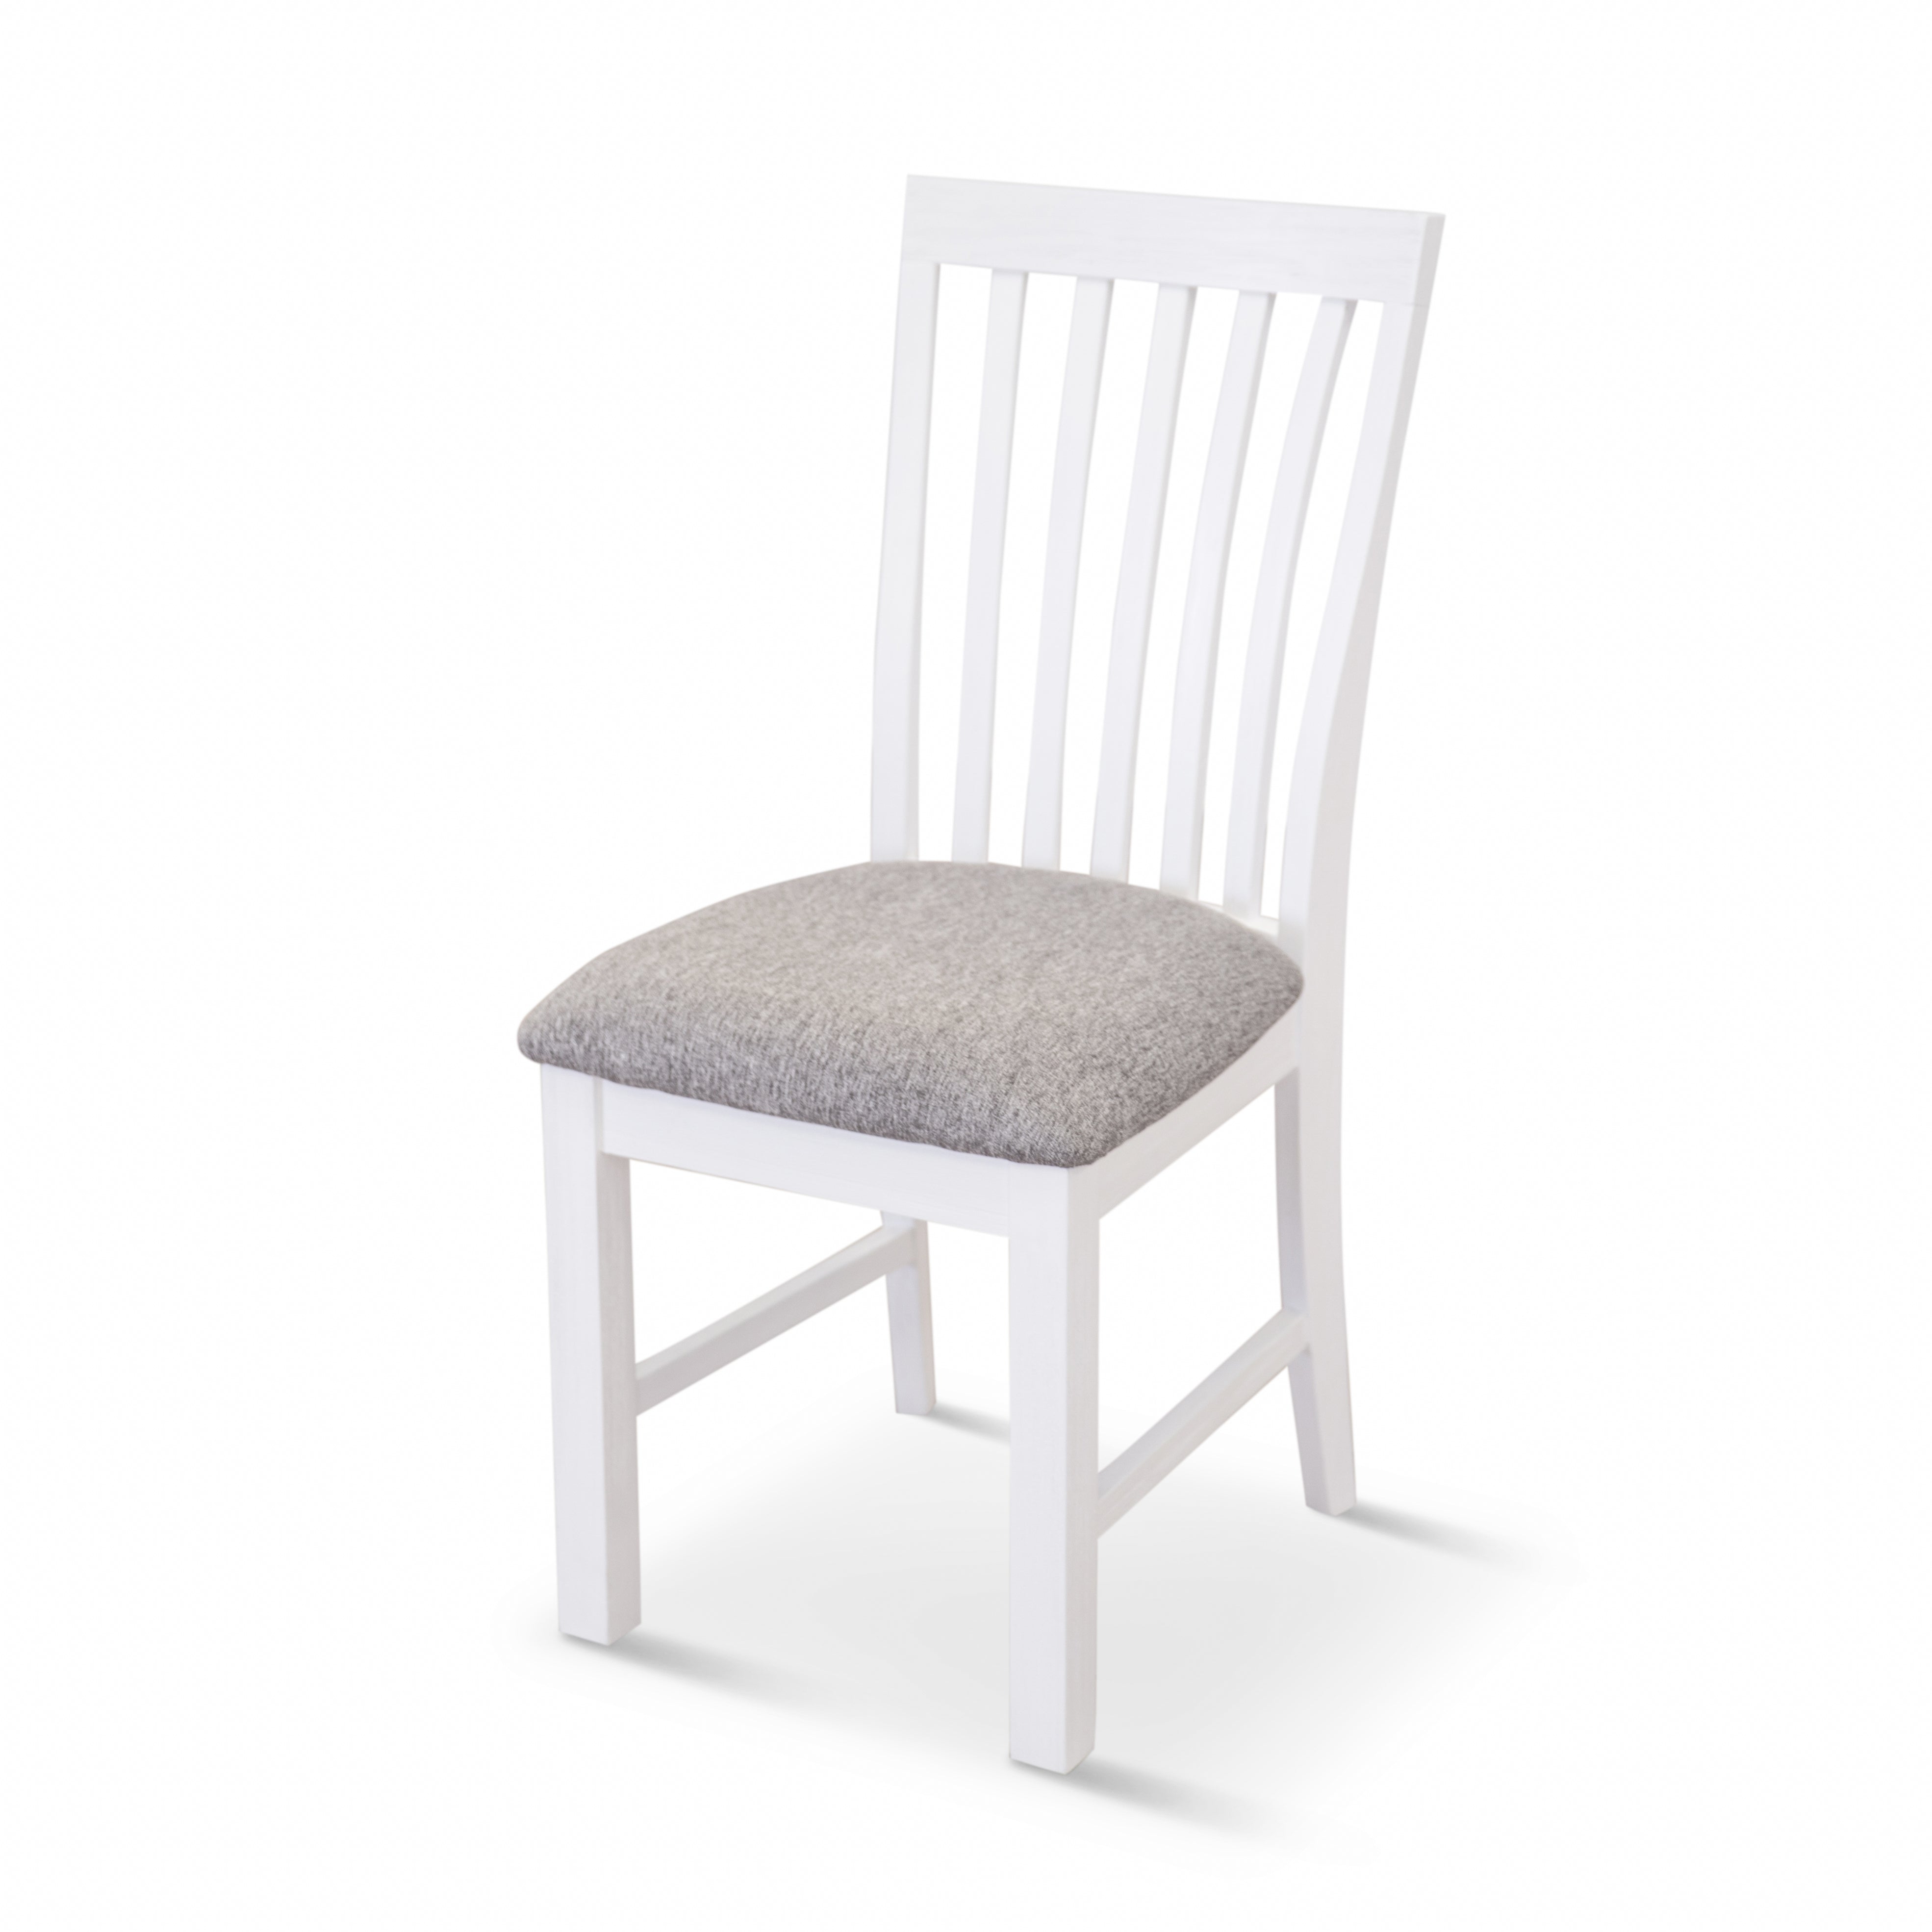 Dining Chair Set Of 4 Solid Acacia Timber Wood Coastal Furniture - White